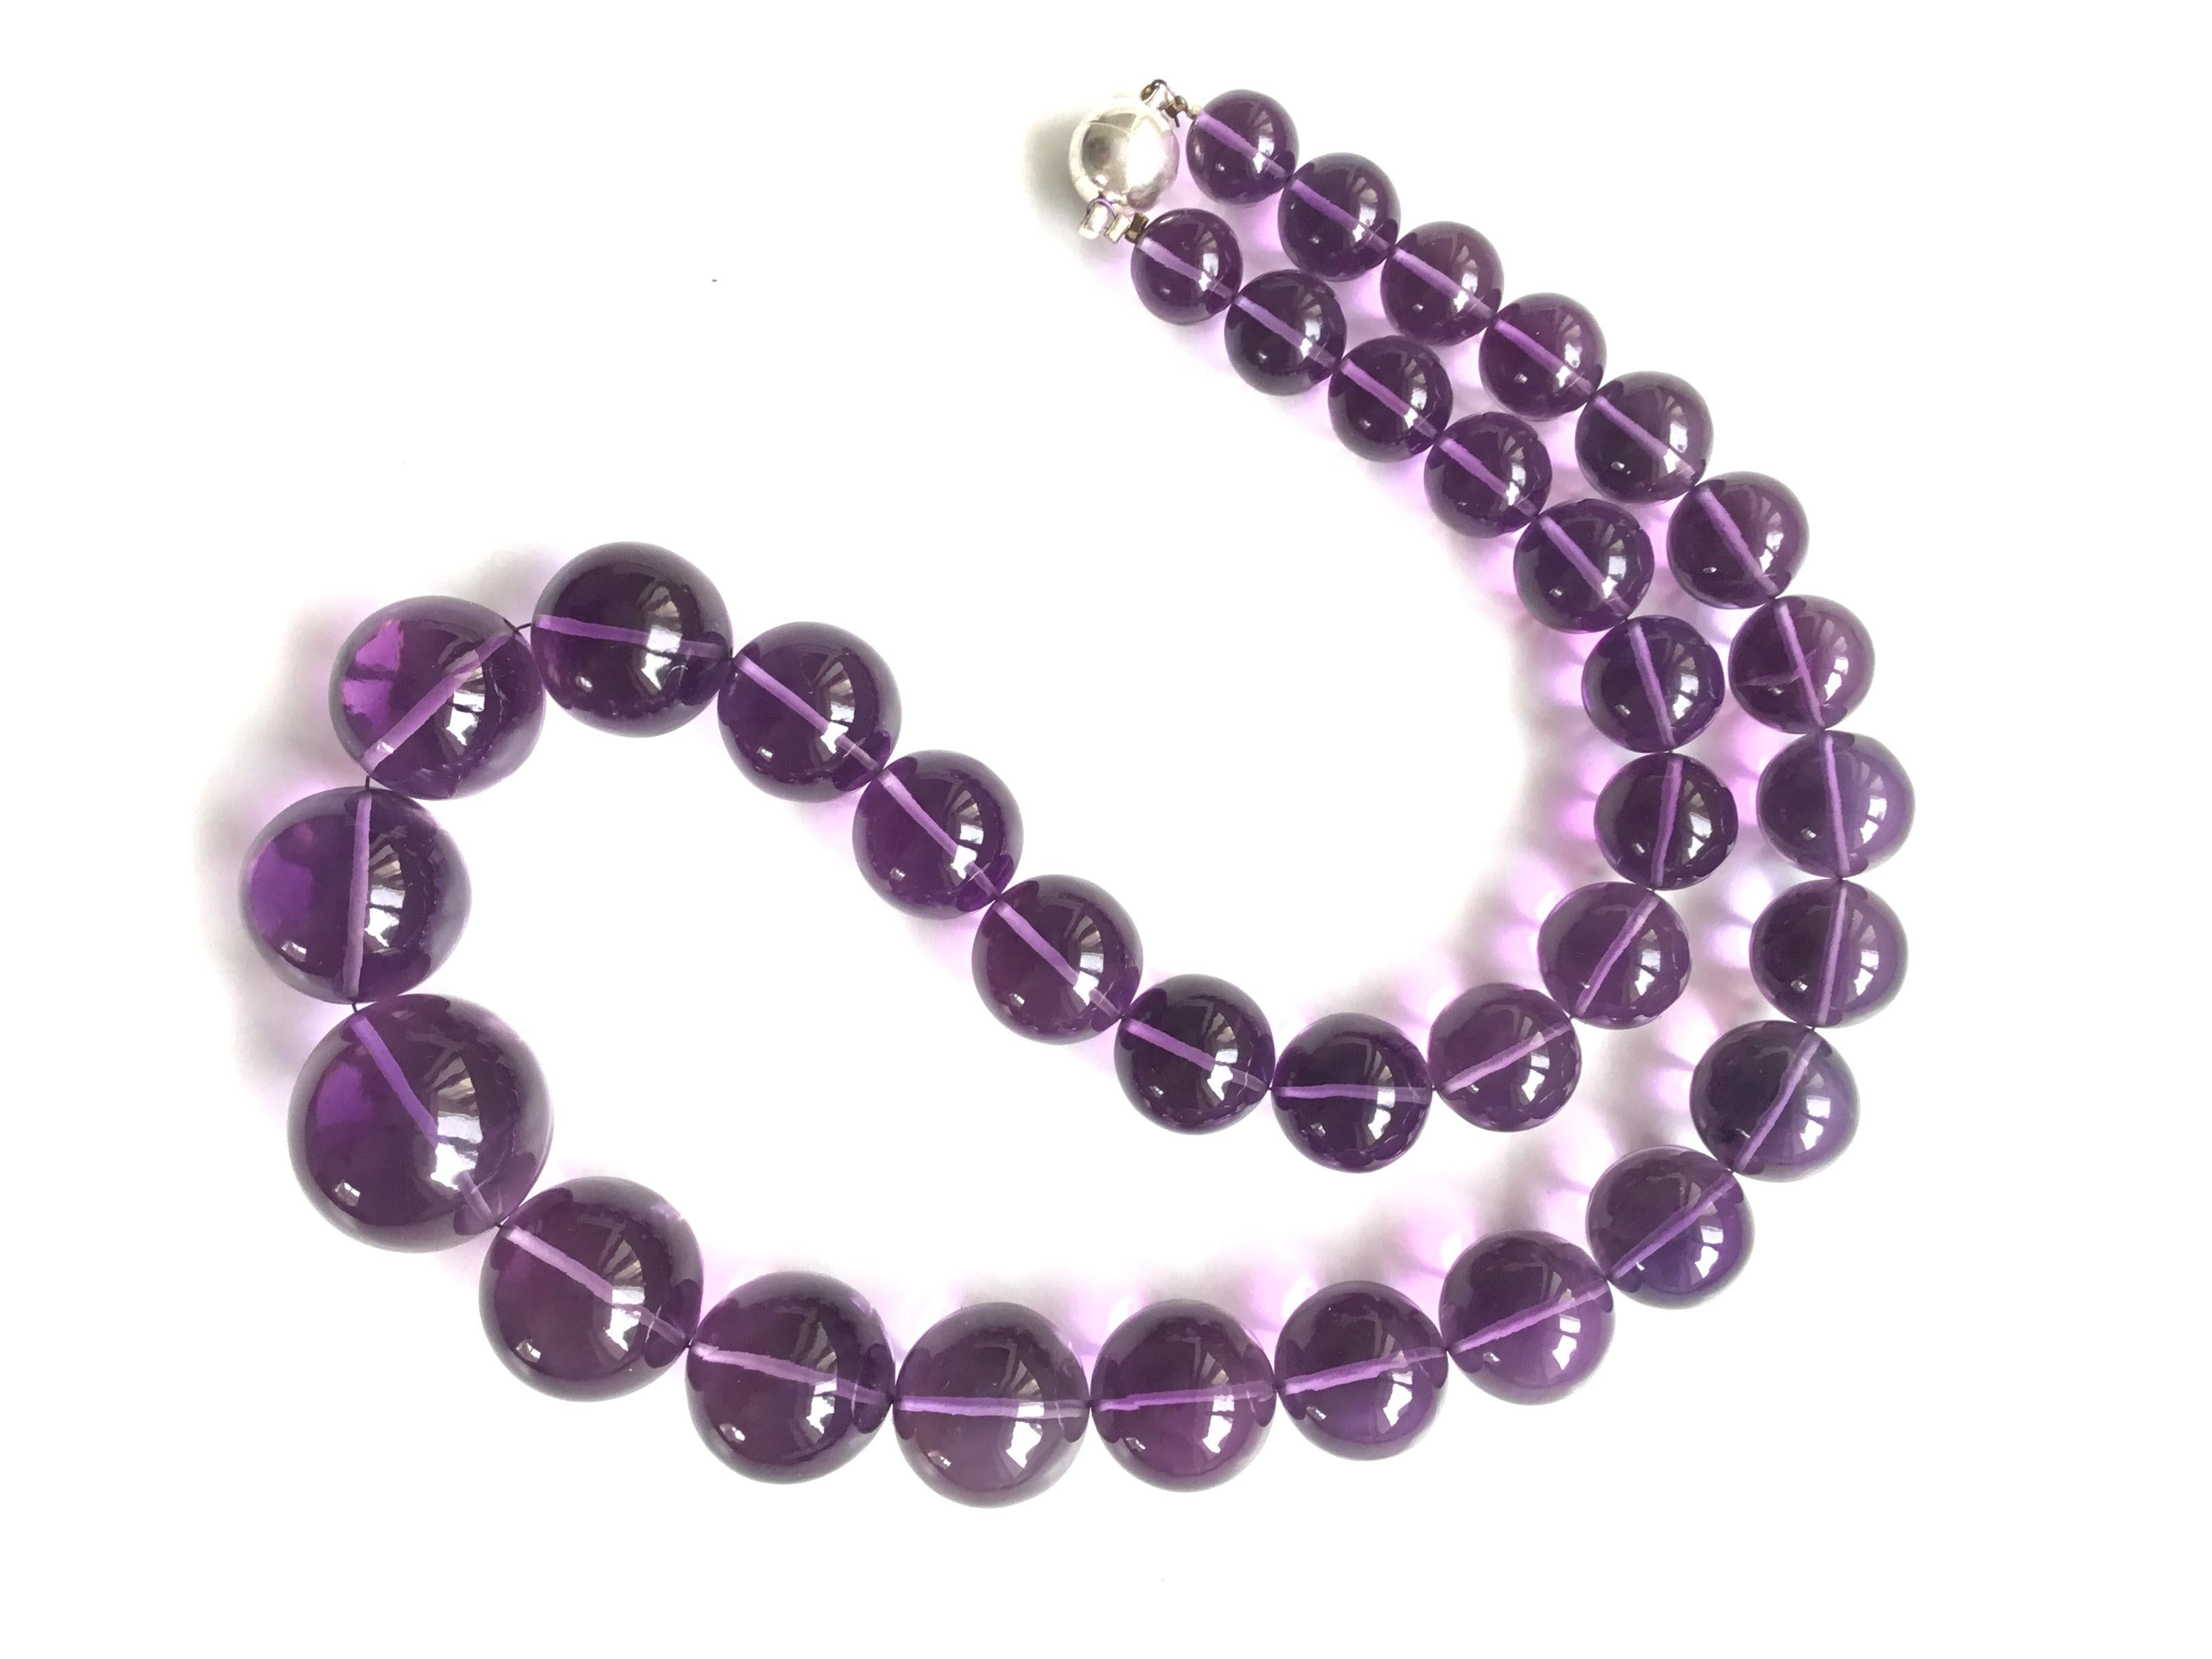 Top Quality Amethyst Balls Necklace Loupe Clean For Sale 1